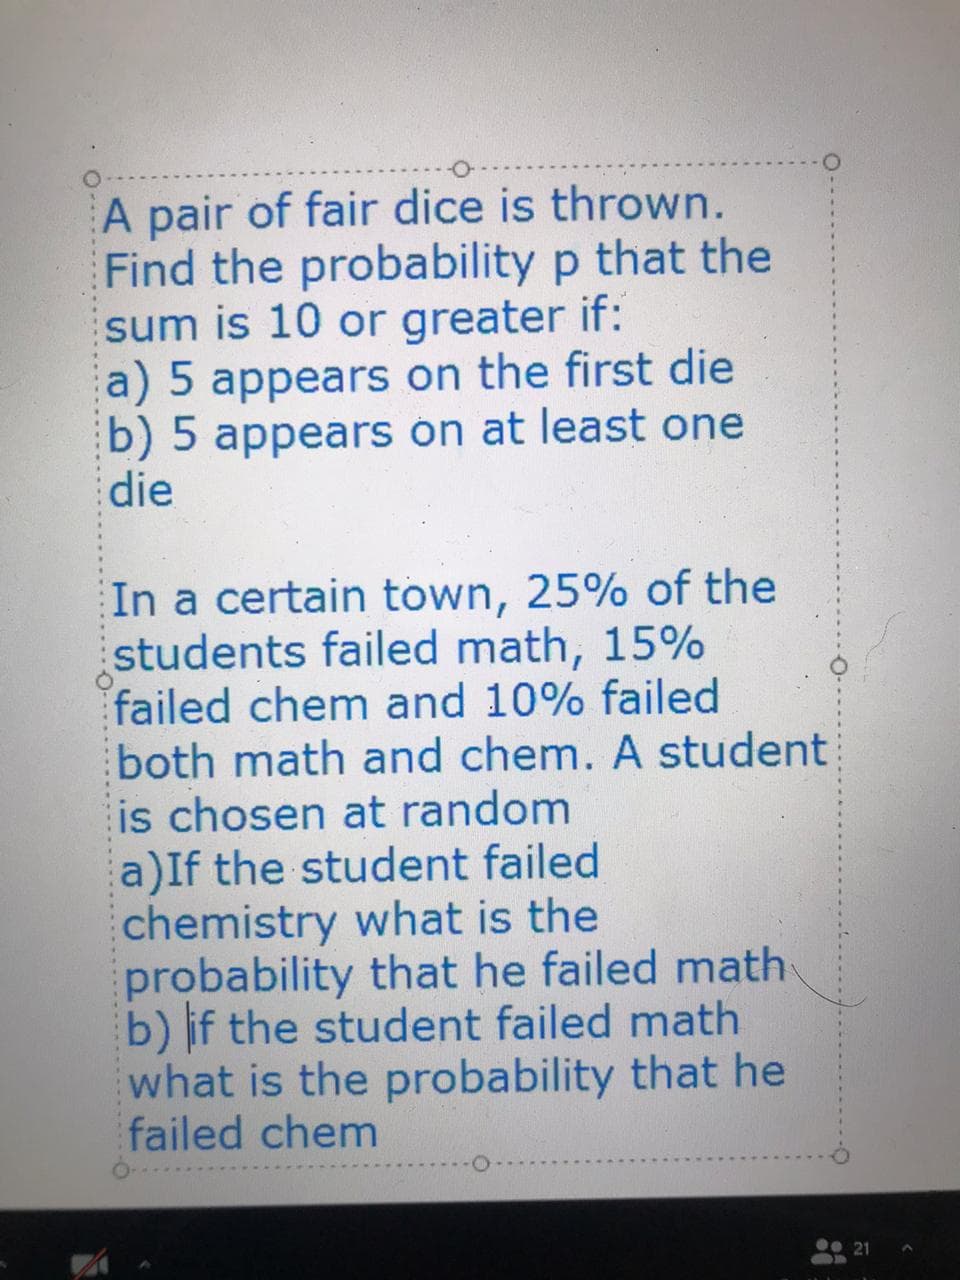 A pair of fair dice is thrown.
Find the probability p that the
sum is 10 or greater if:
a) 5 appears on the first die
b) 5 appears ón at least one
die
In a certain town, 25% of the
students failed math, 15%
failed chem and 10% failed
both math and chem. A student
is chosen at random
a)If the student failed
chemistry what is the
probability that he failed math
b) if the student failed math
what is the probability that he
failed chem
